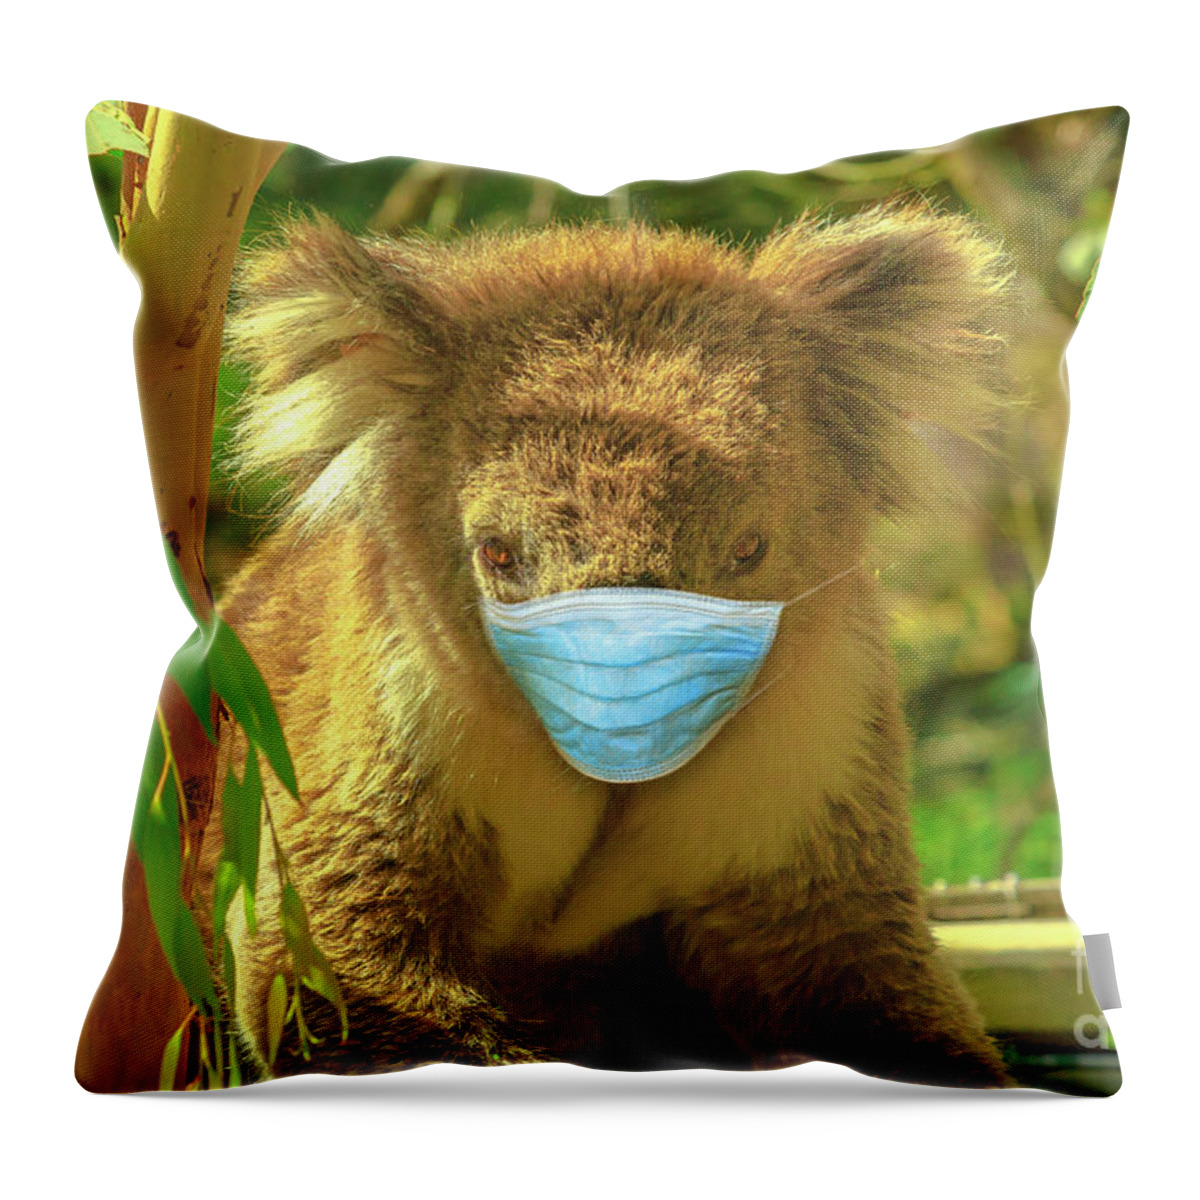 Covid 19 Australia Throw Pillow featuring the photograph Koala With Surgical Mask by Benny Marty